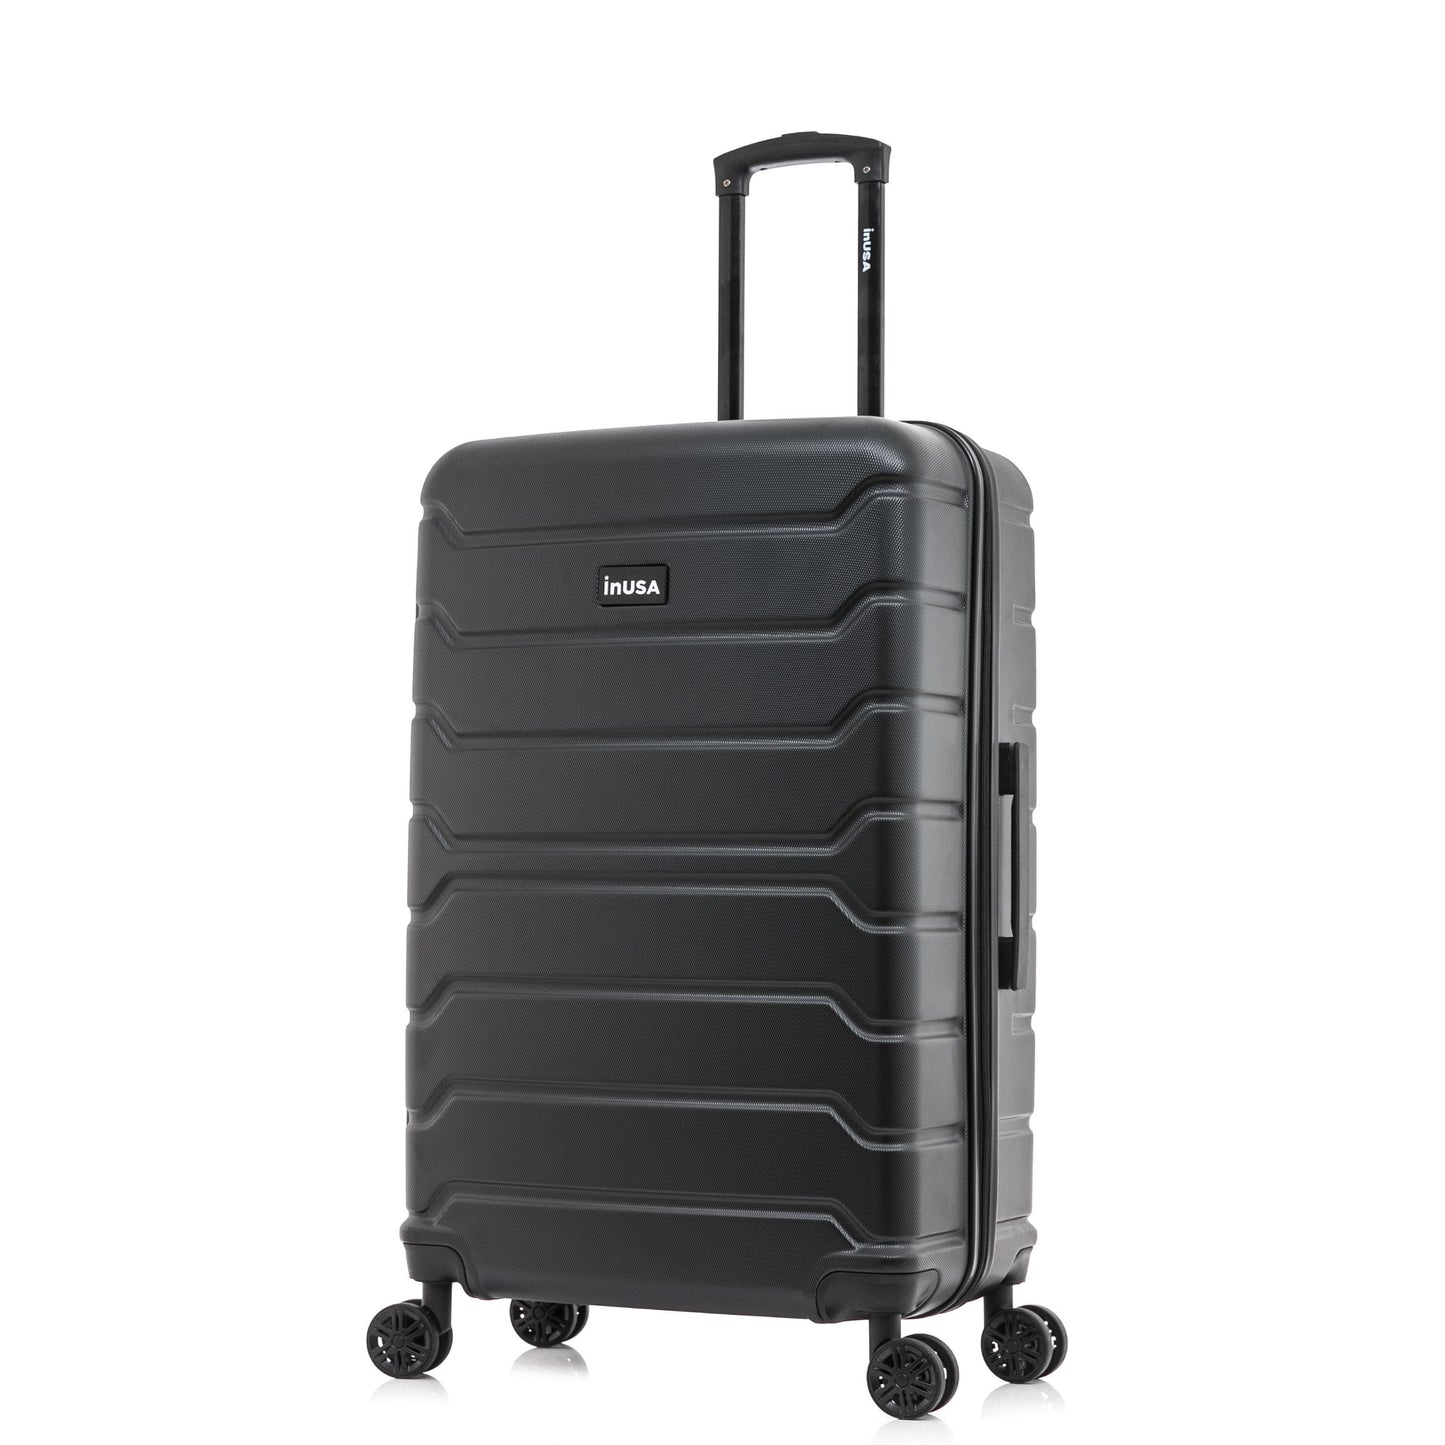 InUSA Trend 28" Hardside Lightweight Luggage with Spinner Wheels, Handle, and Trolley, White